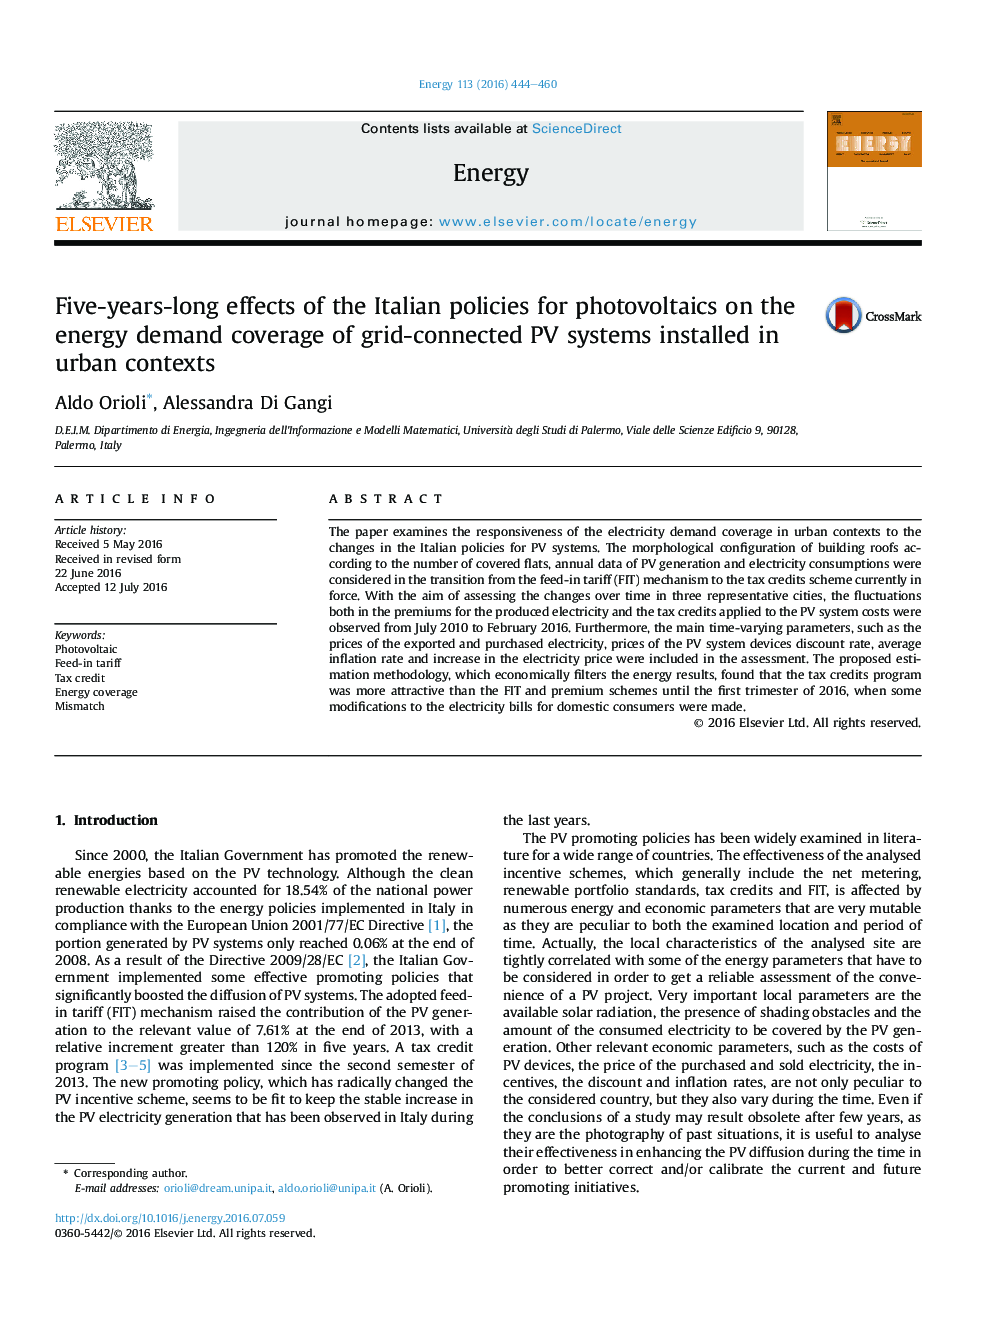 Five-years-long effects of the Italian policies for photovoltaics on the energy demand coverage of grid-connected PV systems installed in urban contexts